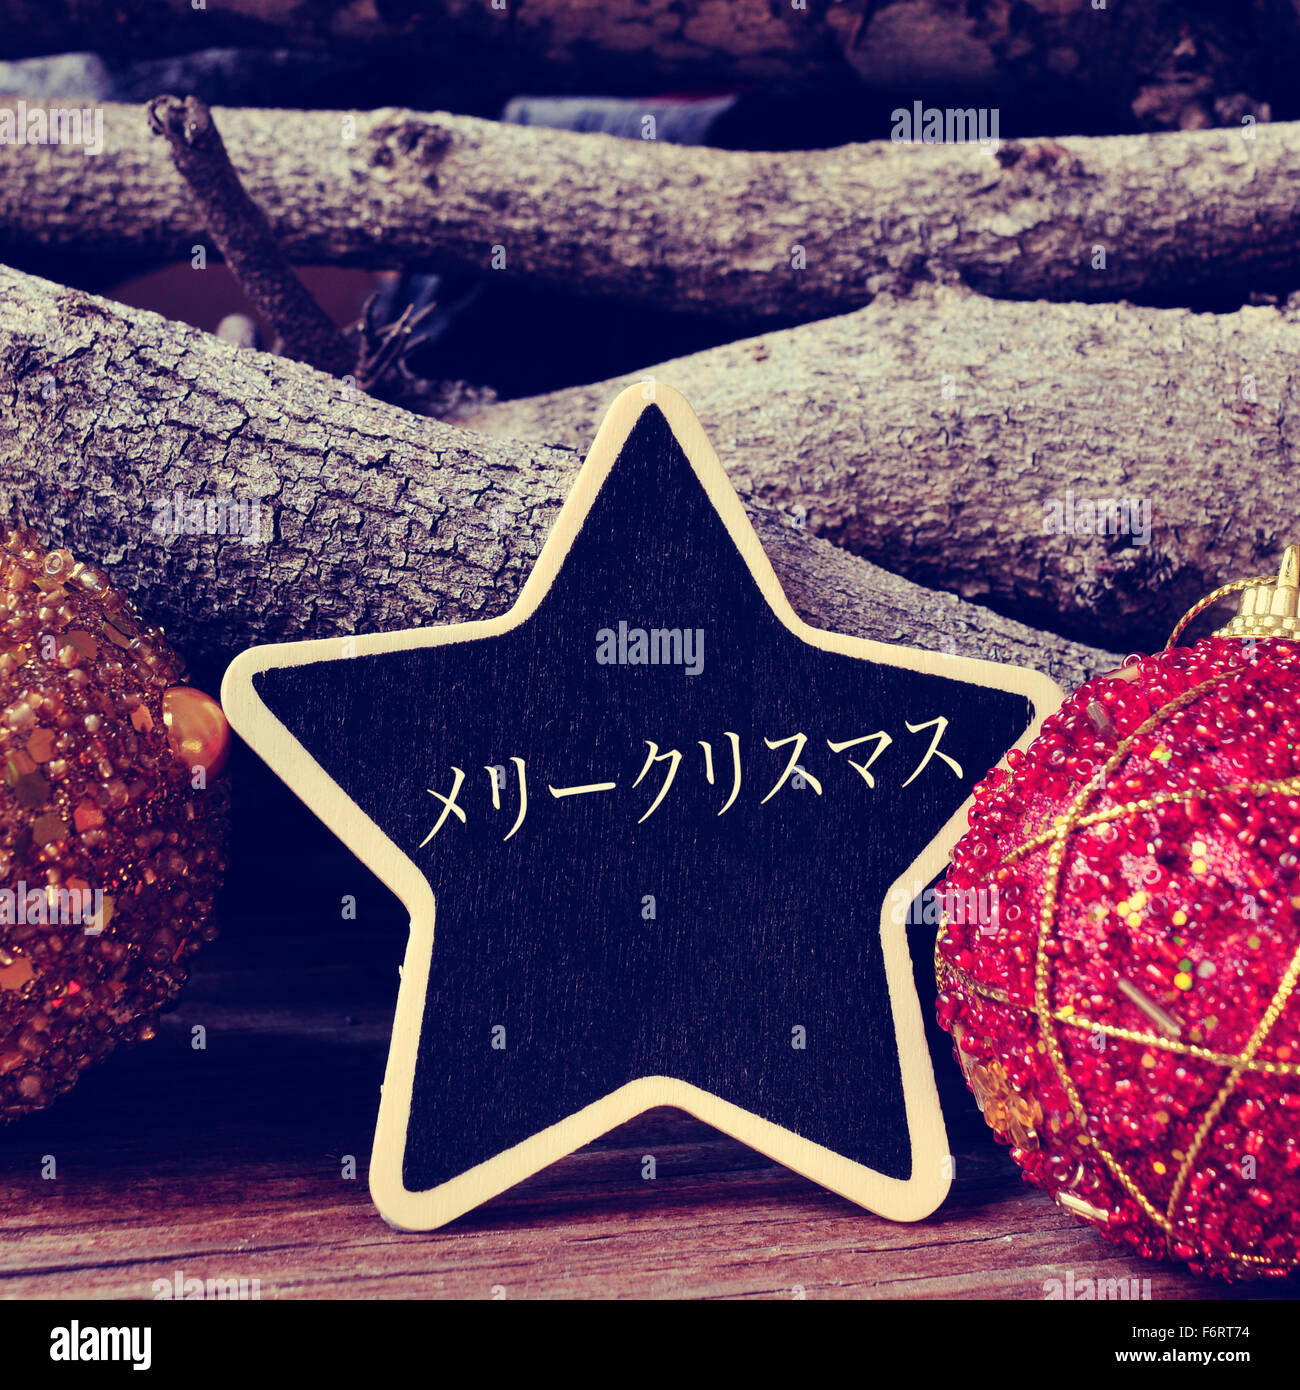 a star-shaped chalkboard with the text merry christmas written in japanese surrounded by christmas balls and logs Stock Photo